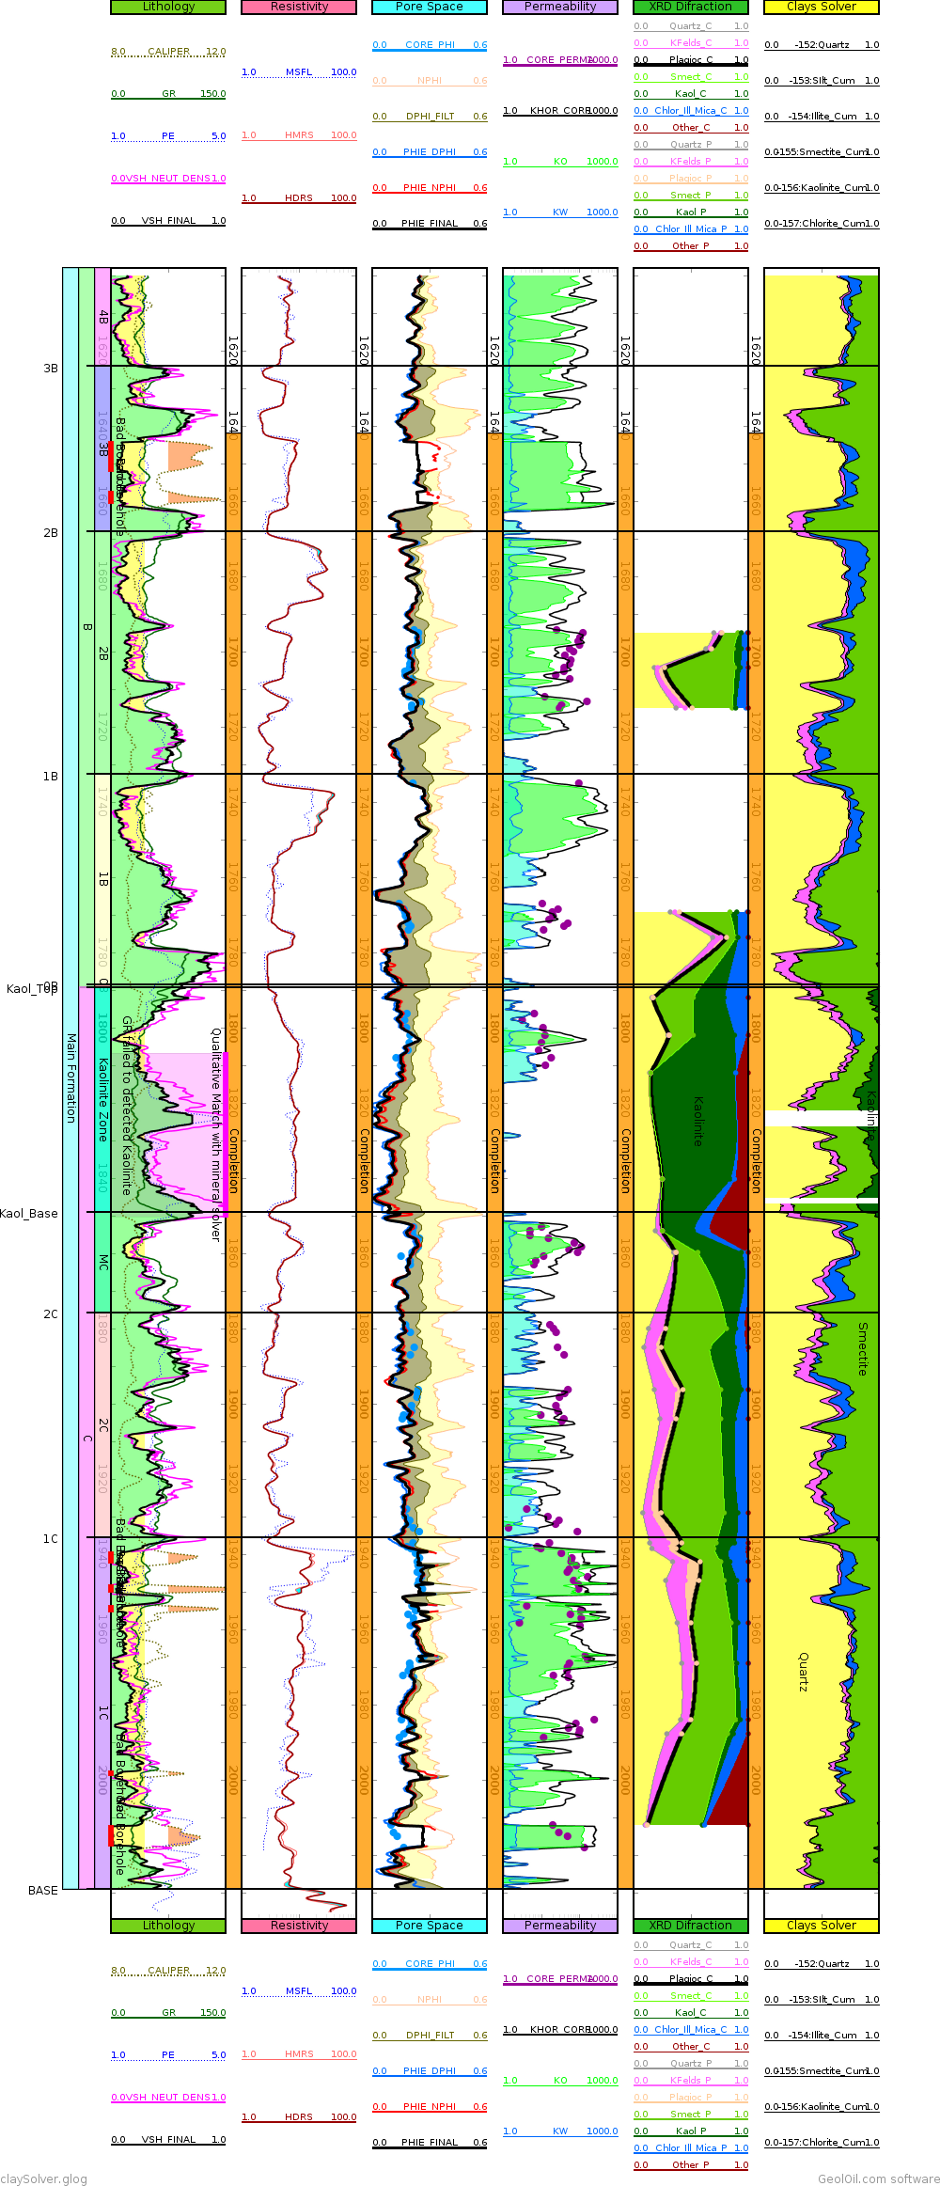 Mineral solved log plot for quartz, silt, and clay minerals: illite, smectite, kaolinite, and chlorite